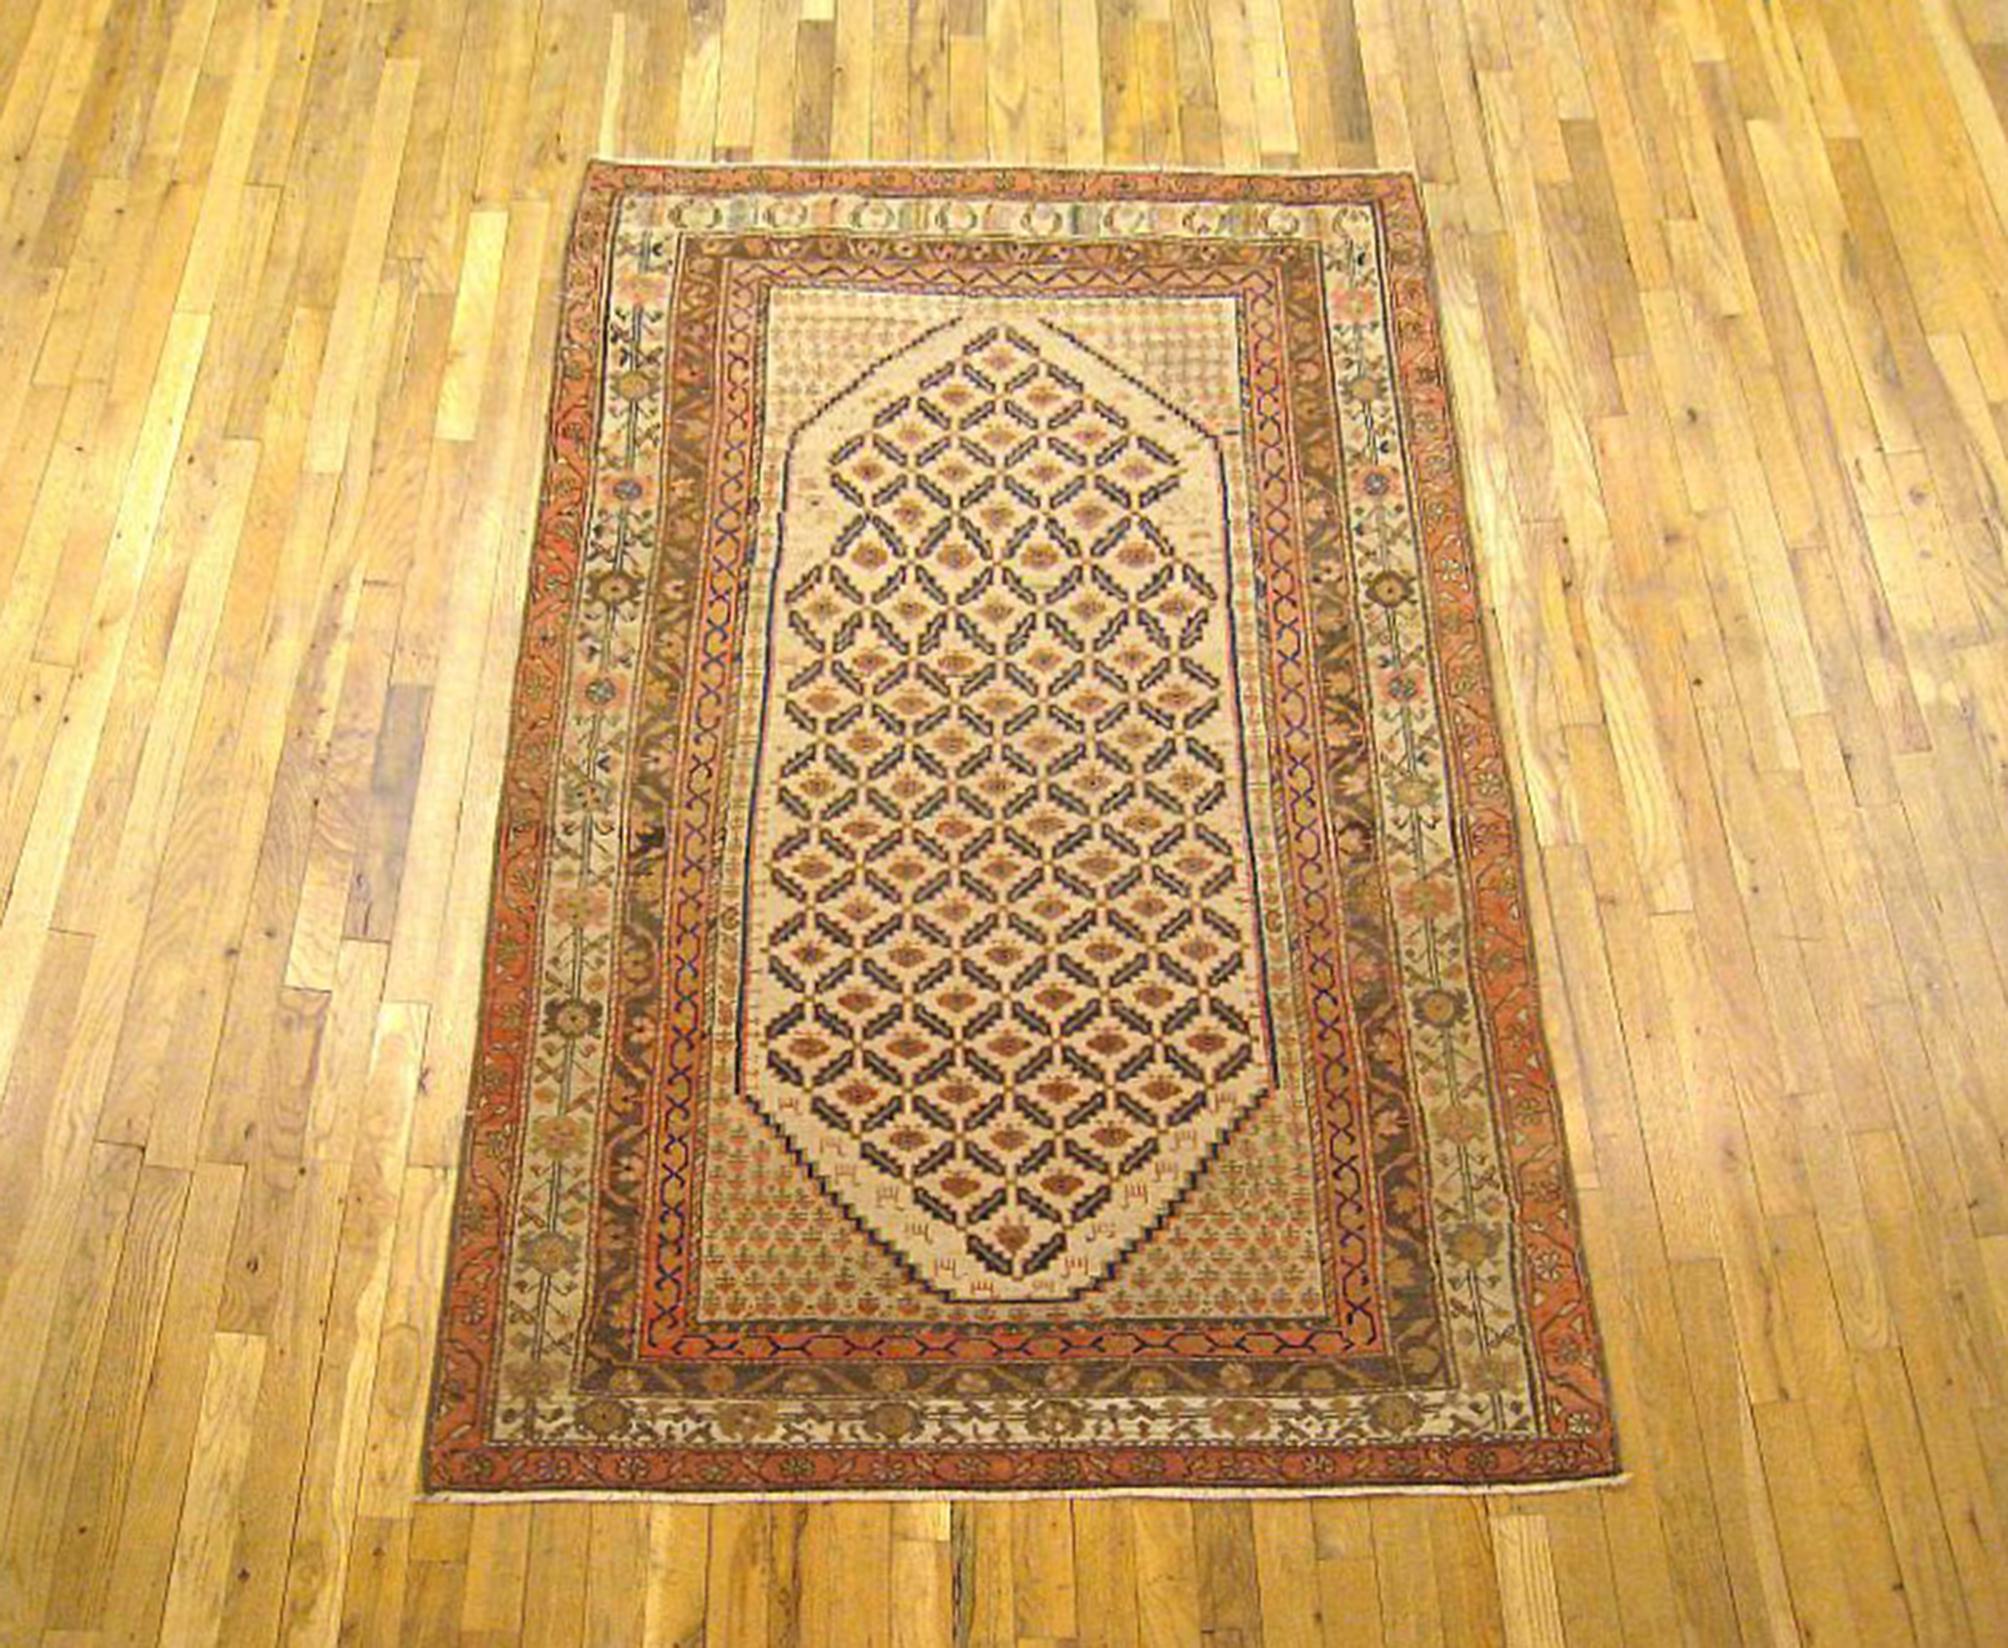 An antique Persian Hamadan Camel Hair oriental rug, size 6'3 x 4'0, circa 1920. This handsome hand-knotted wool carpet is uniquely sized and styled for a piece of this type, with a repeating diamond design in the central field, enclosed within